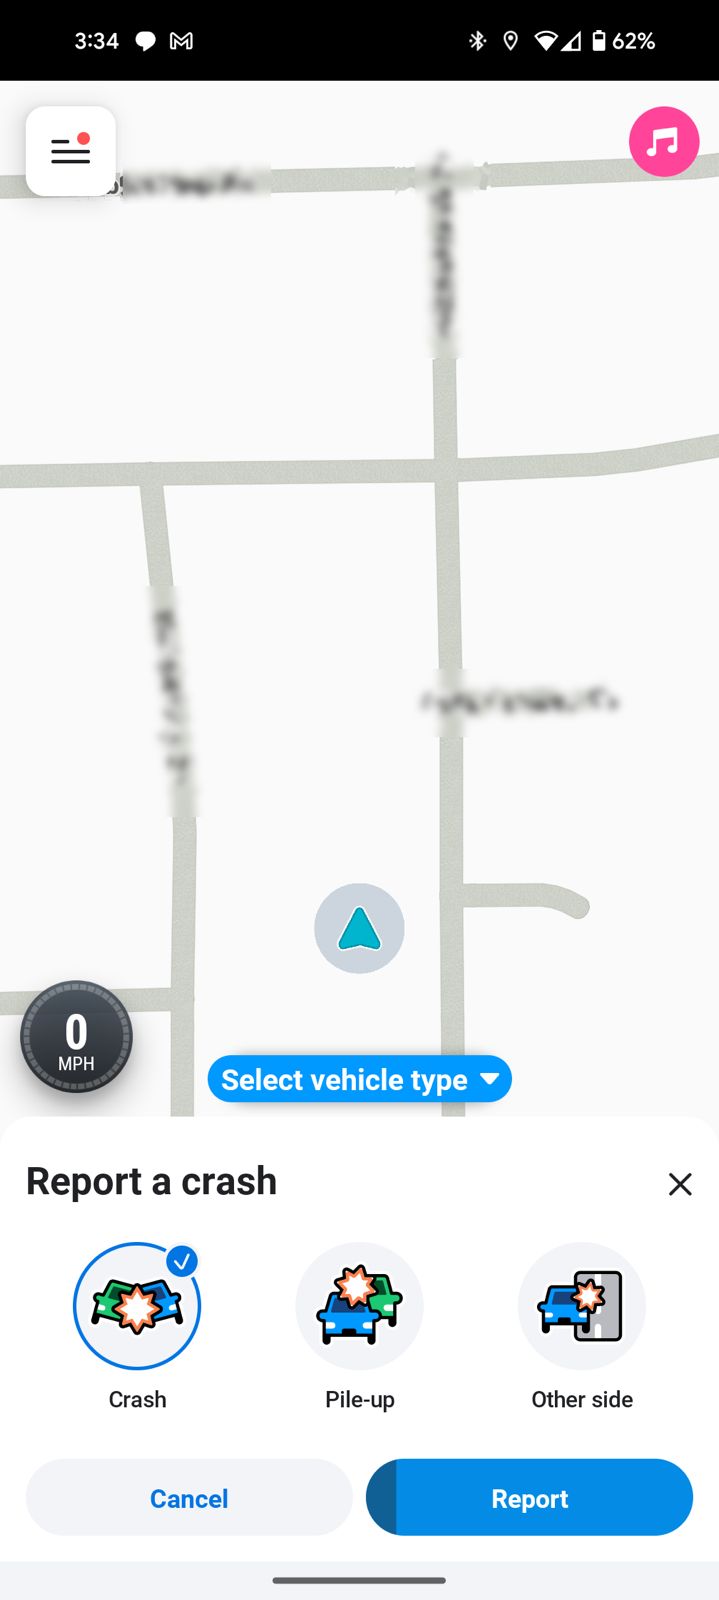 New hazard icon simplifies the reporting process on Waze